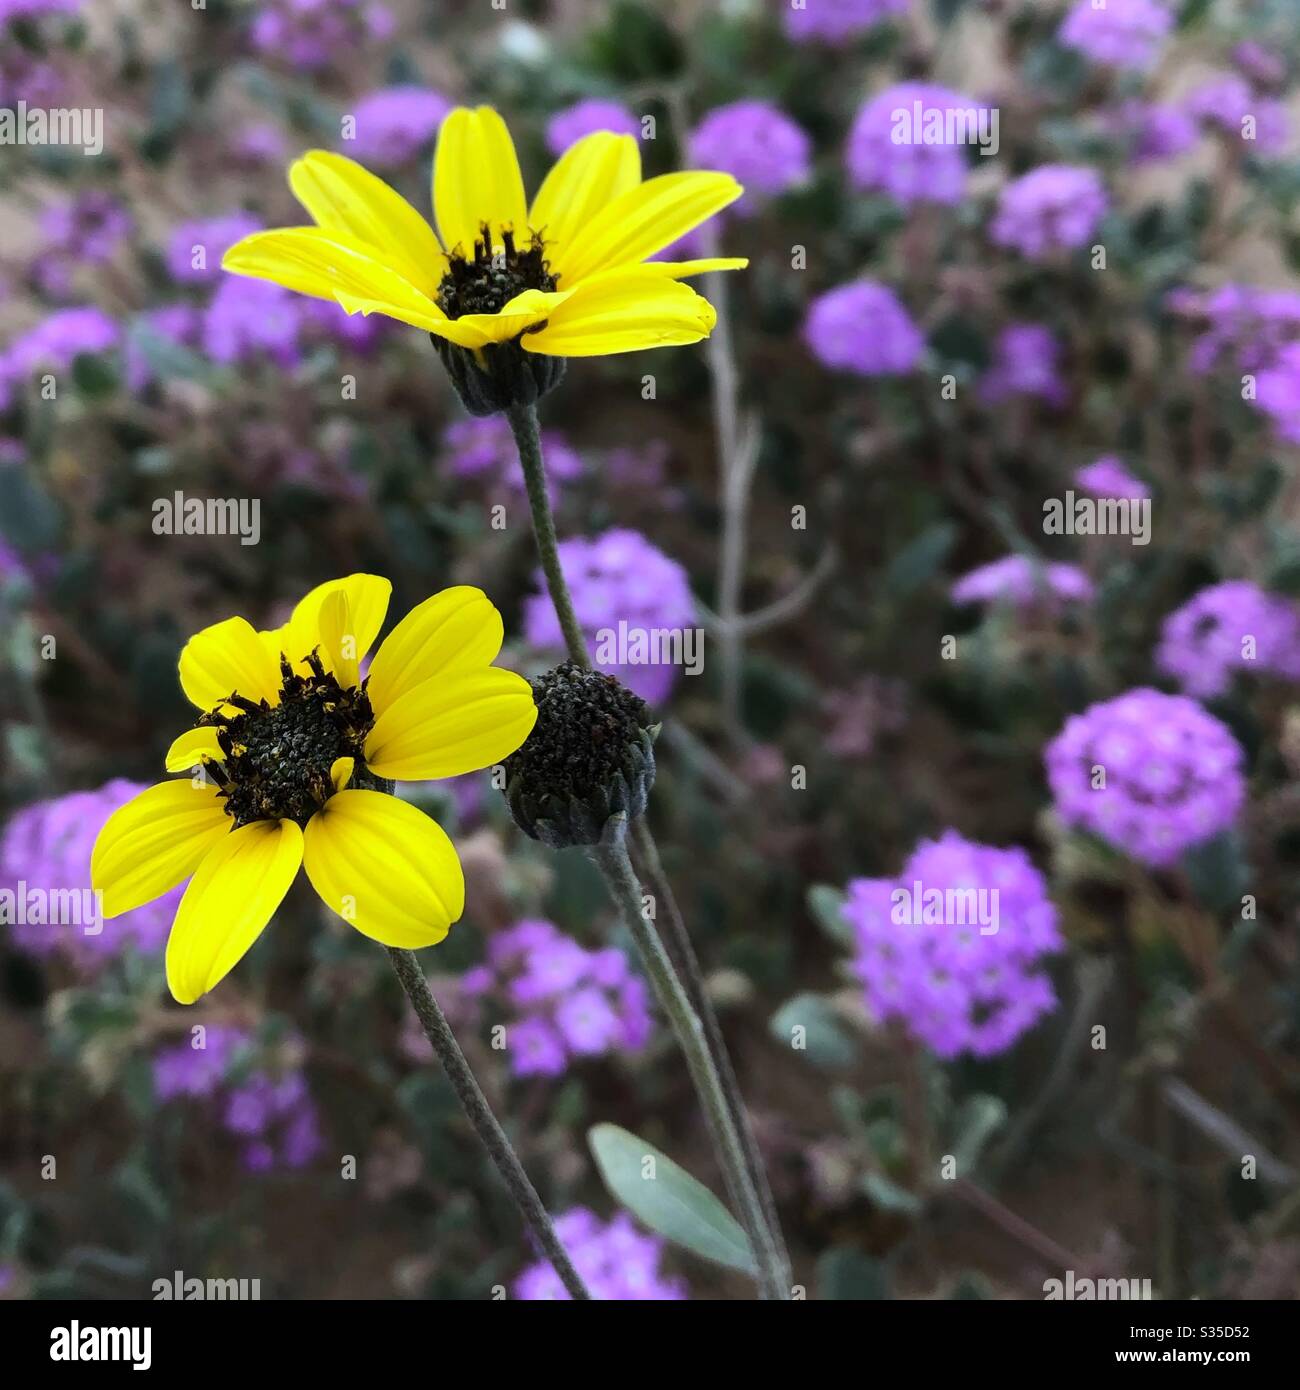 Closeup, two yellow flowers, dark brown centers, single stem, blurred background, several, low growing, purple flowers, desert plants, nature, natural, YumaAZ Stock Photo